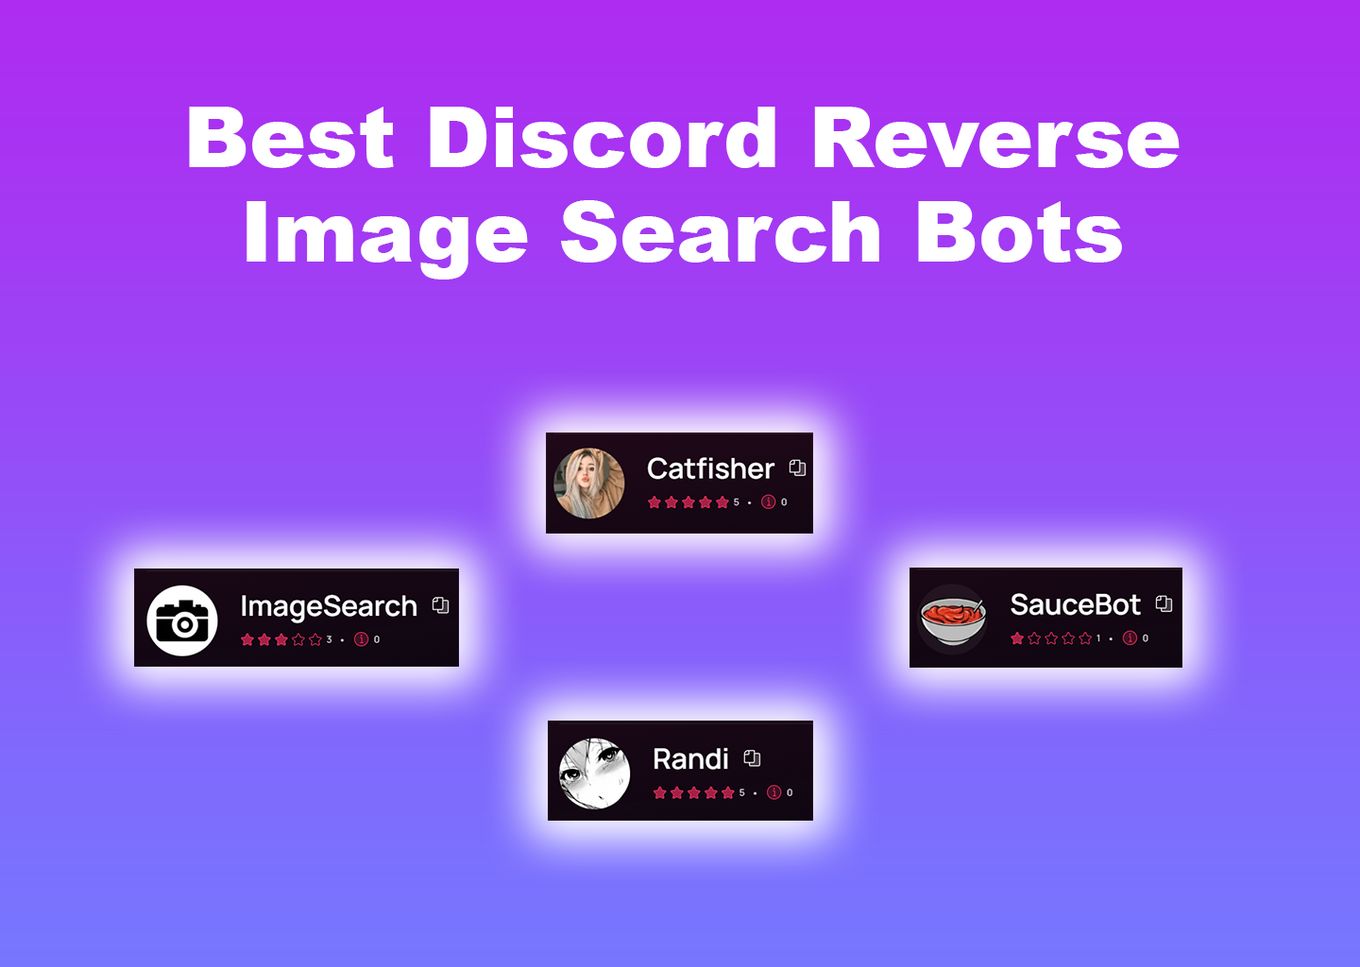 Best Discord Reverse Image Search Bots